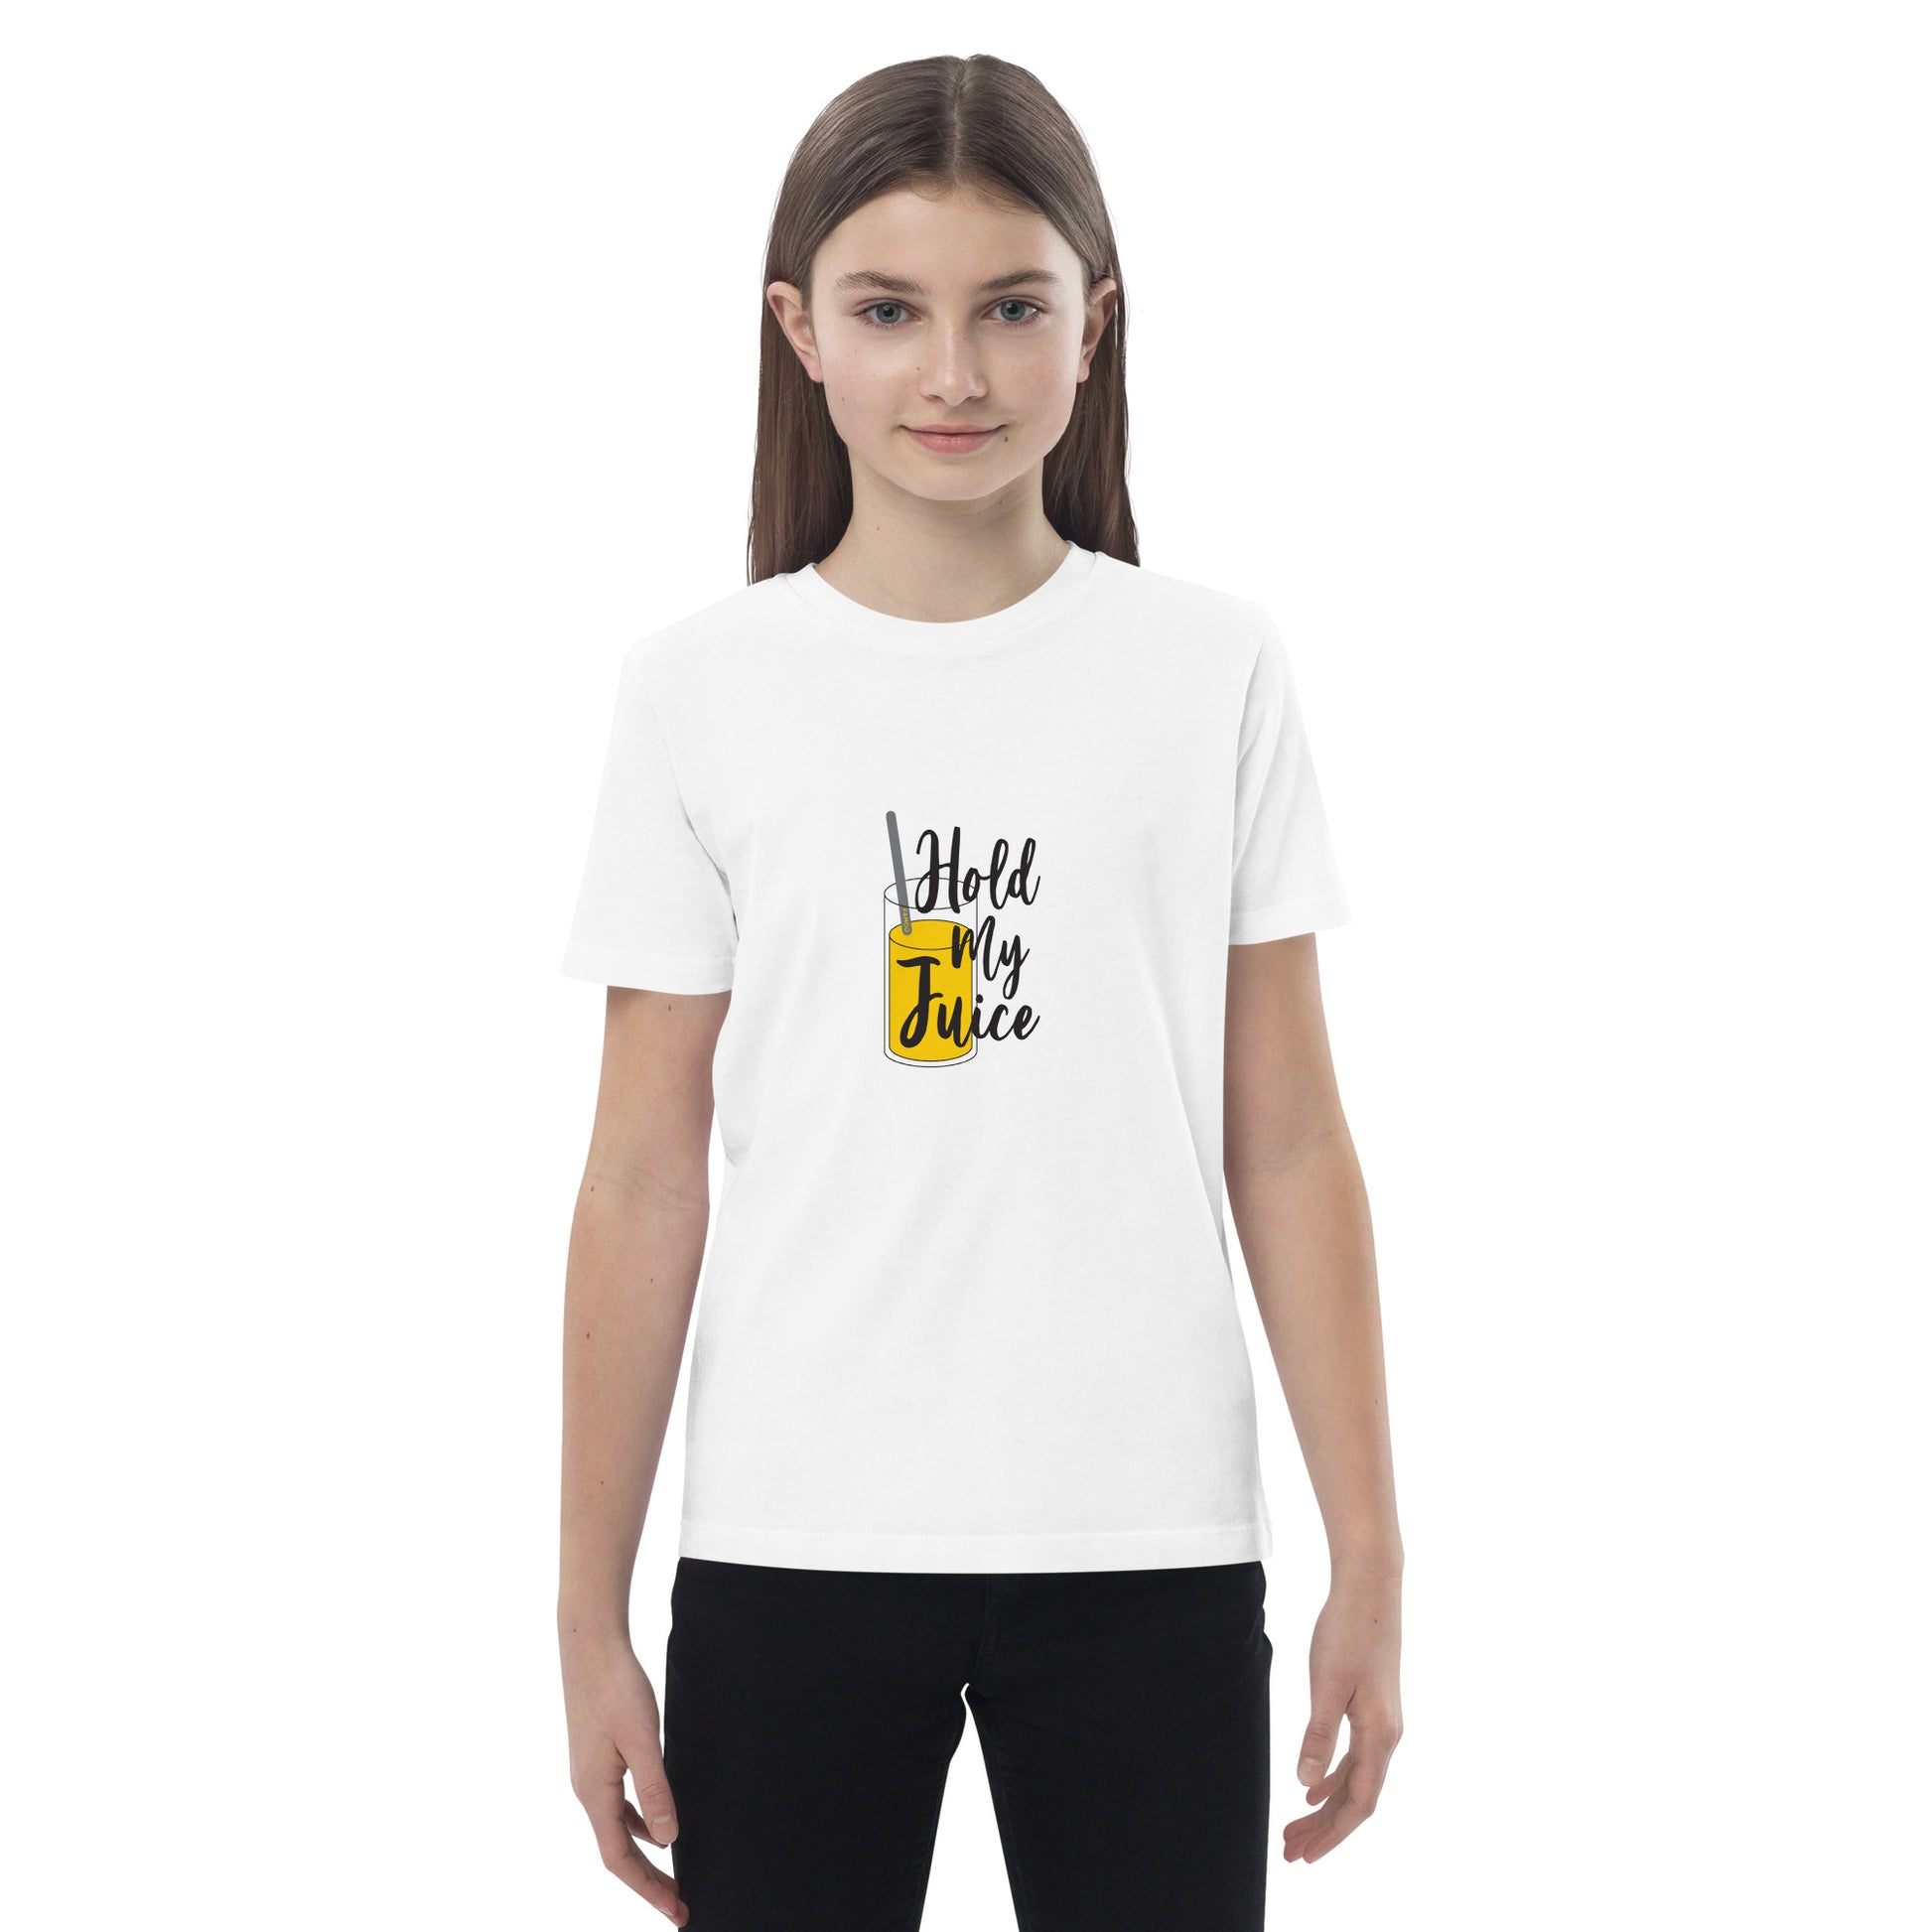 A child wearing a "Hold My Juice" white organic tshirt